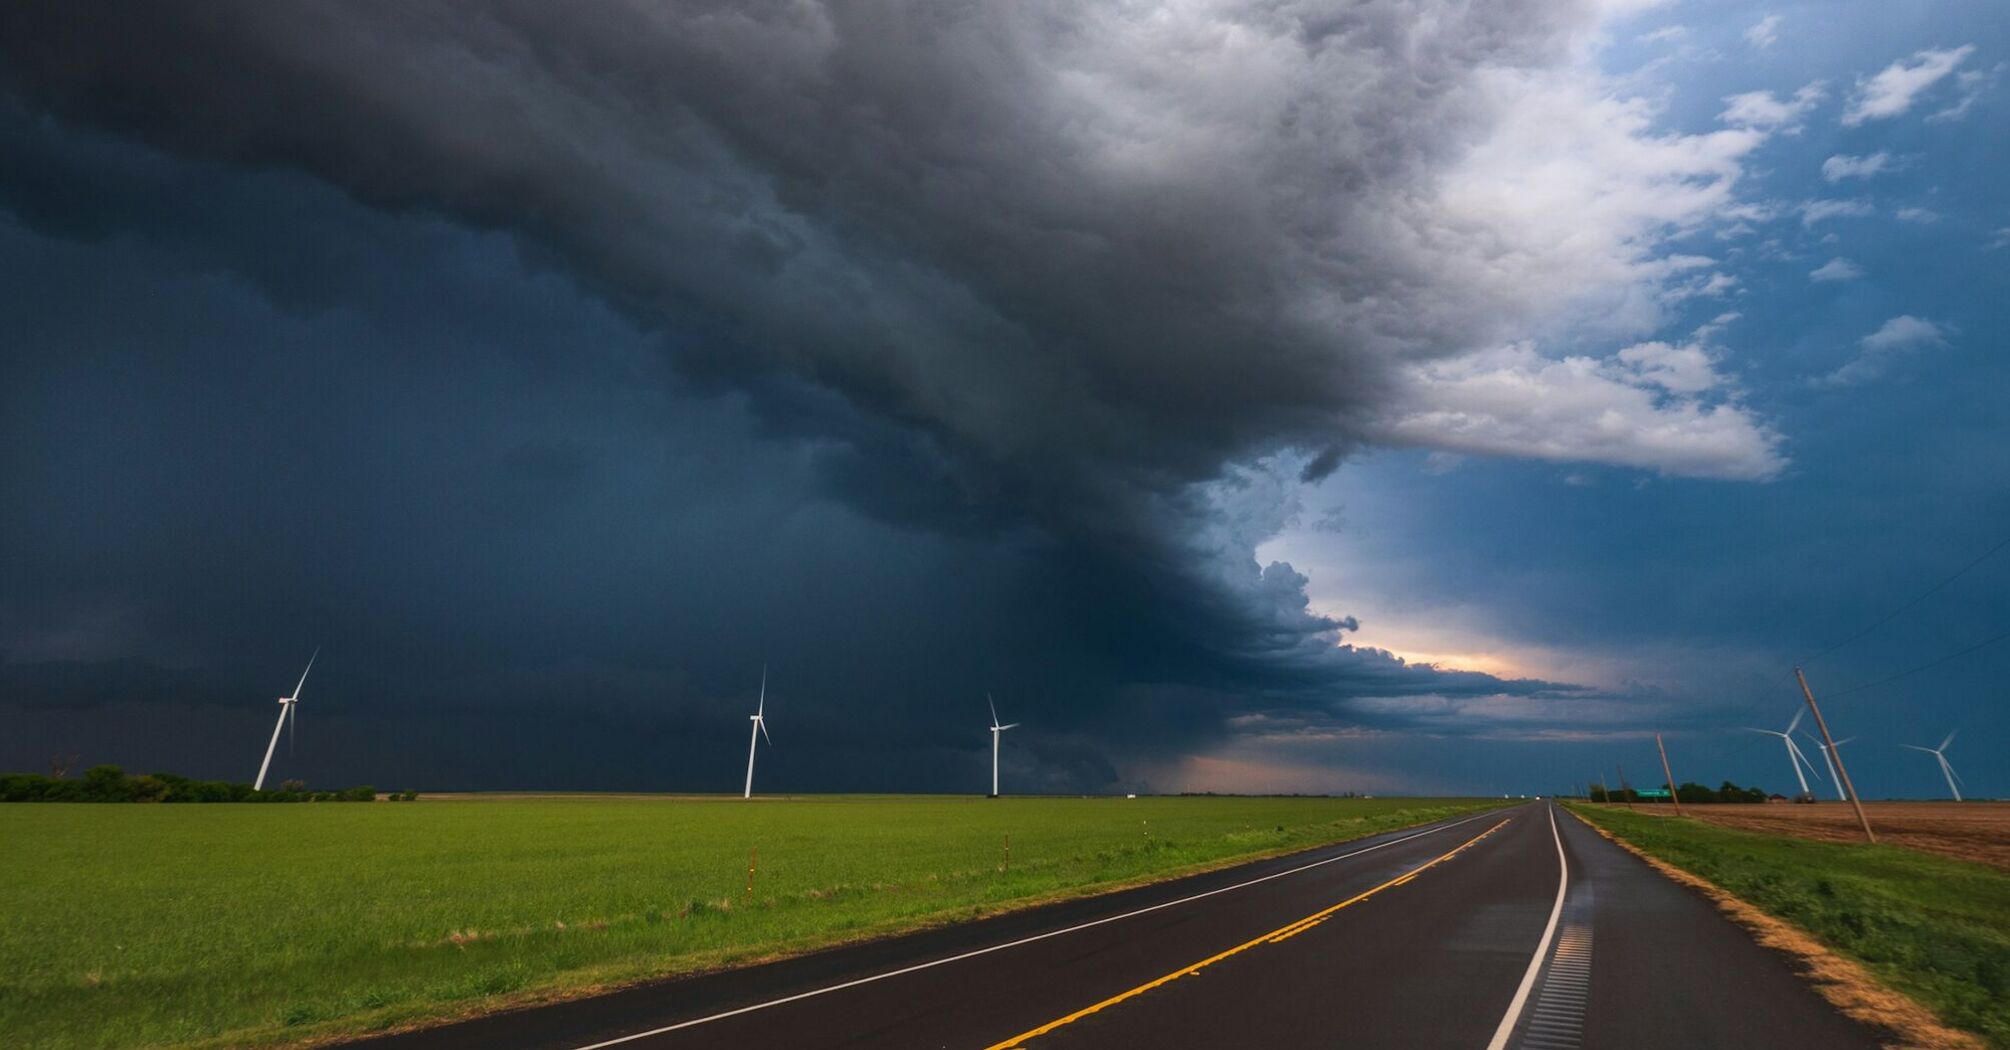 Dark storm clouds over a rural road and wind turbines